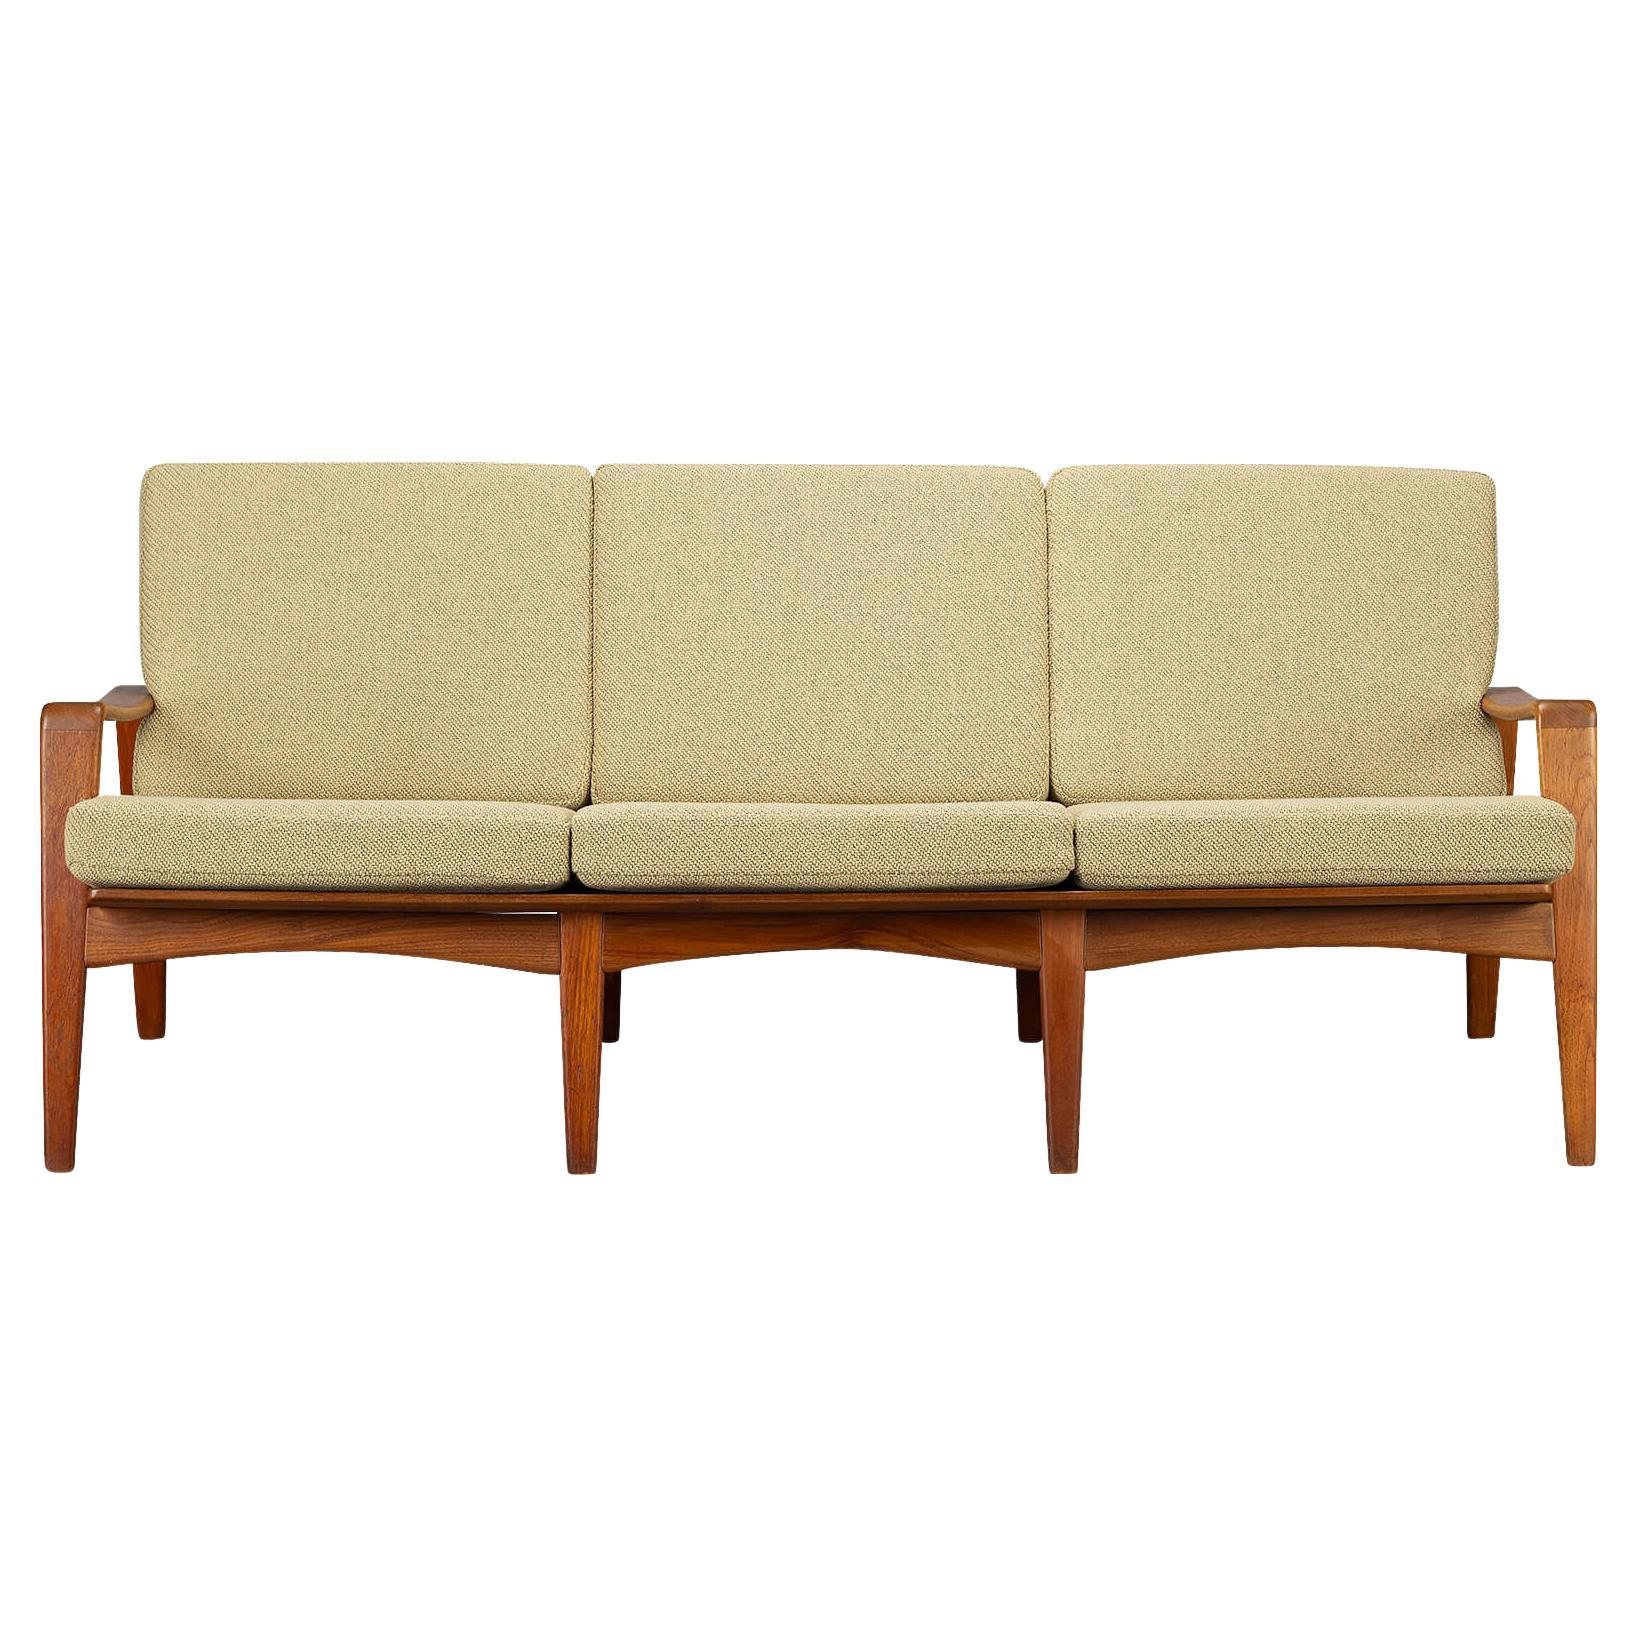 Danish Reupholstered Sofa by Model No. 35 by Arne Wahl Iversen, 1960s For Sale